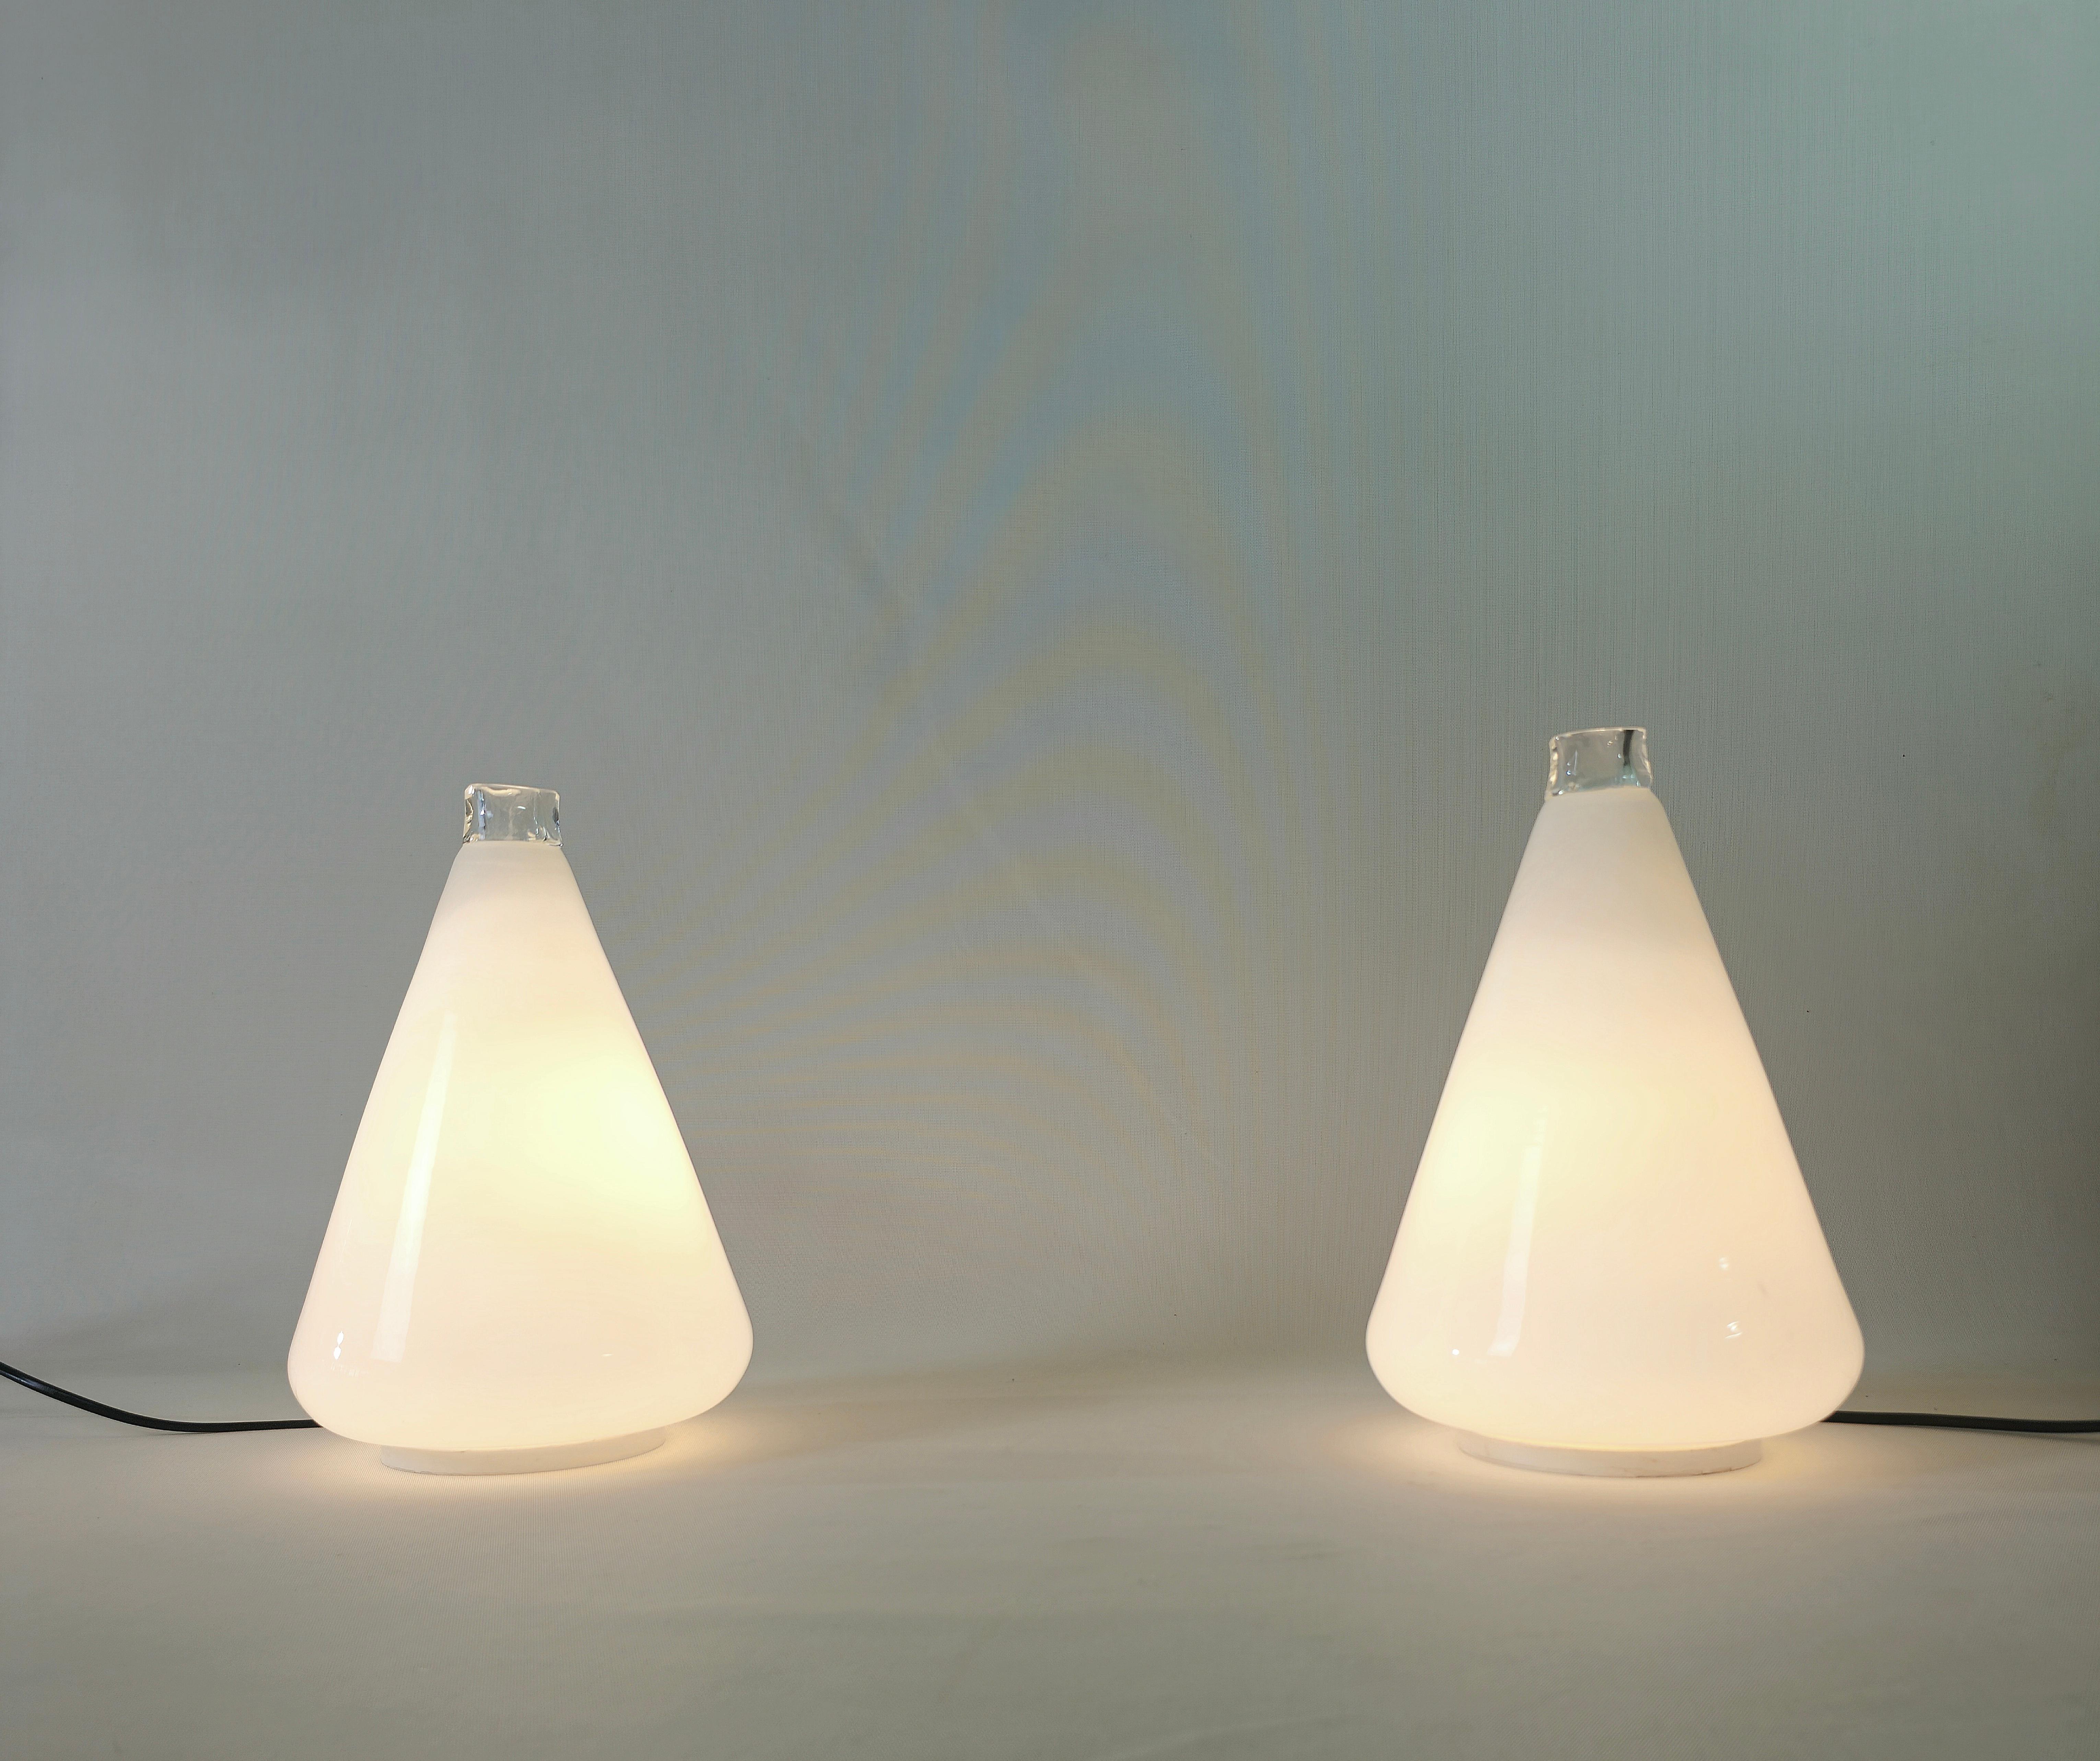 Large Murano Glass Table Lamps Leucos Model Buto by Noti Massari 1970s Set of 2 For Sale 12